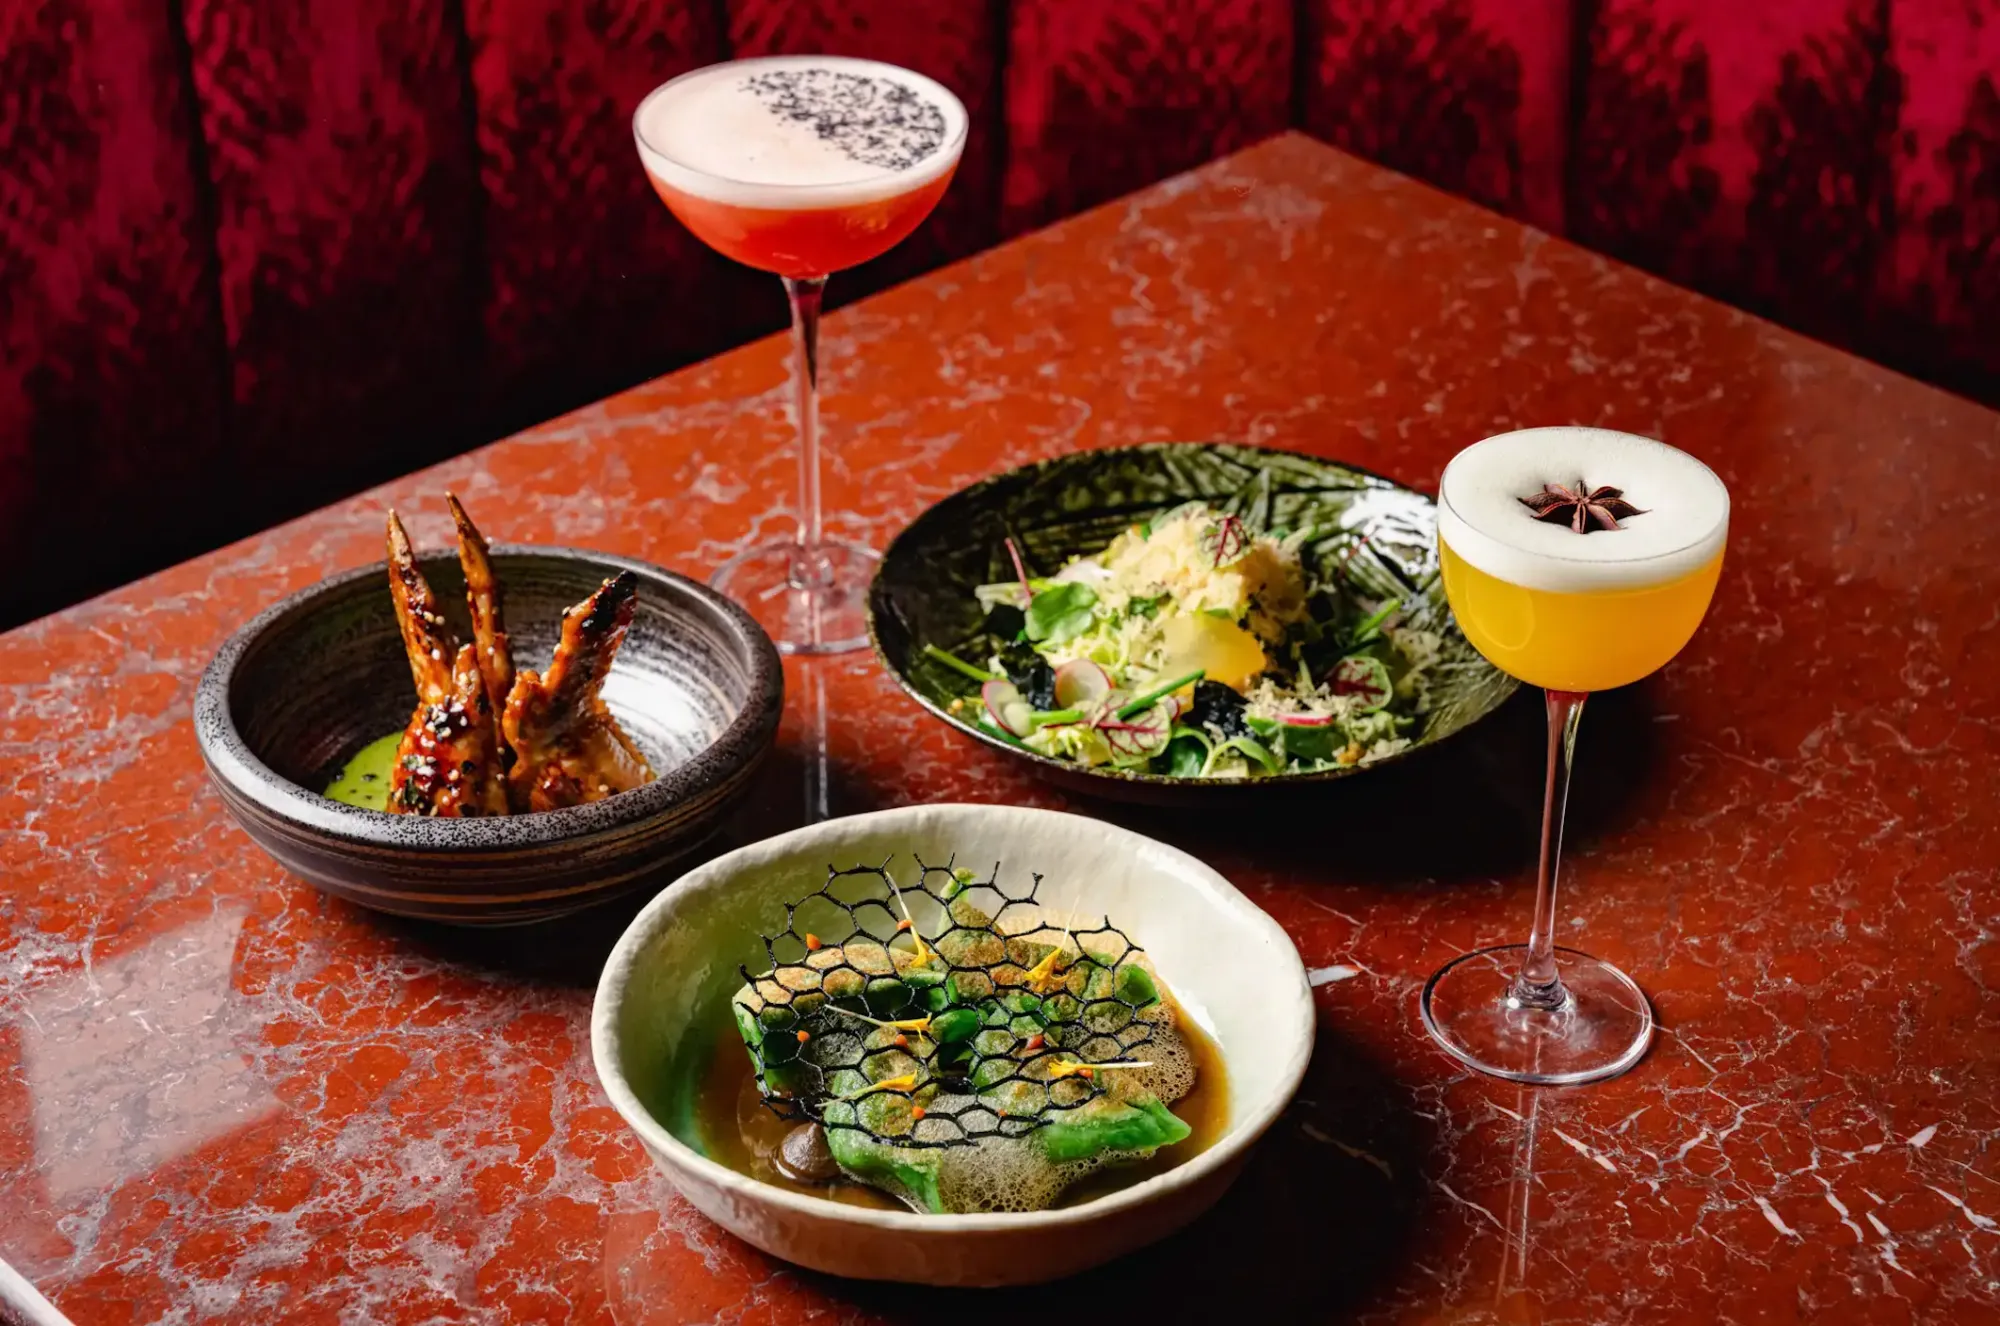 UBA, Shoreditch - 25% off food + complimentary cocktail until 14th April